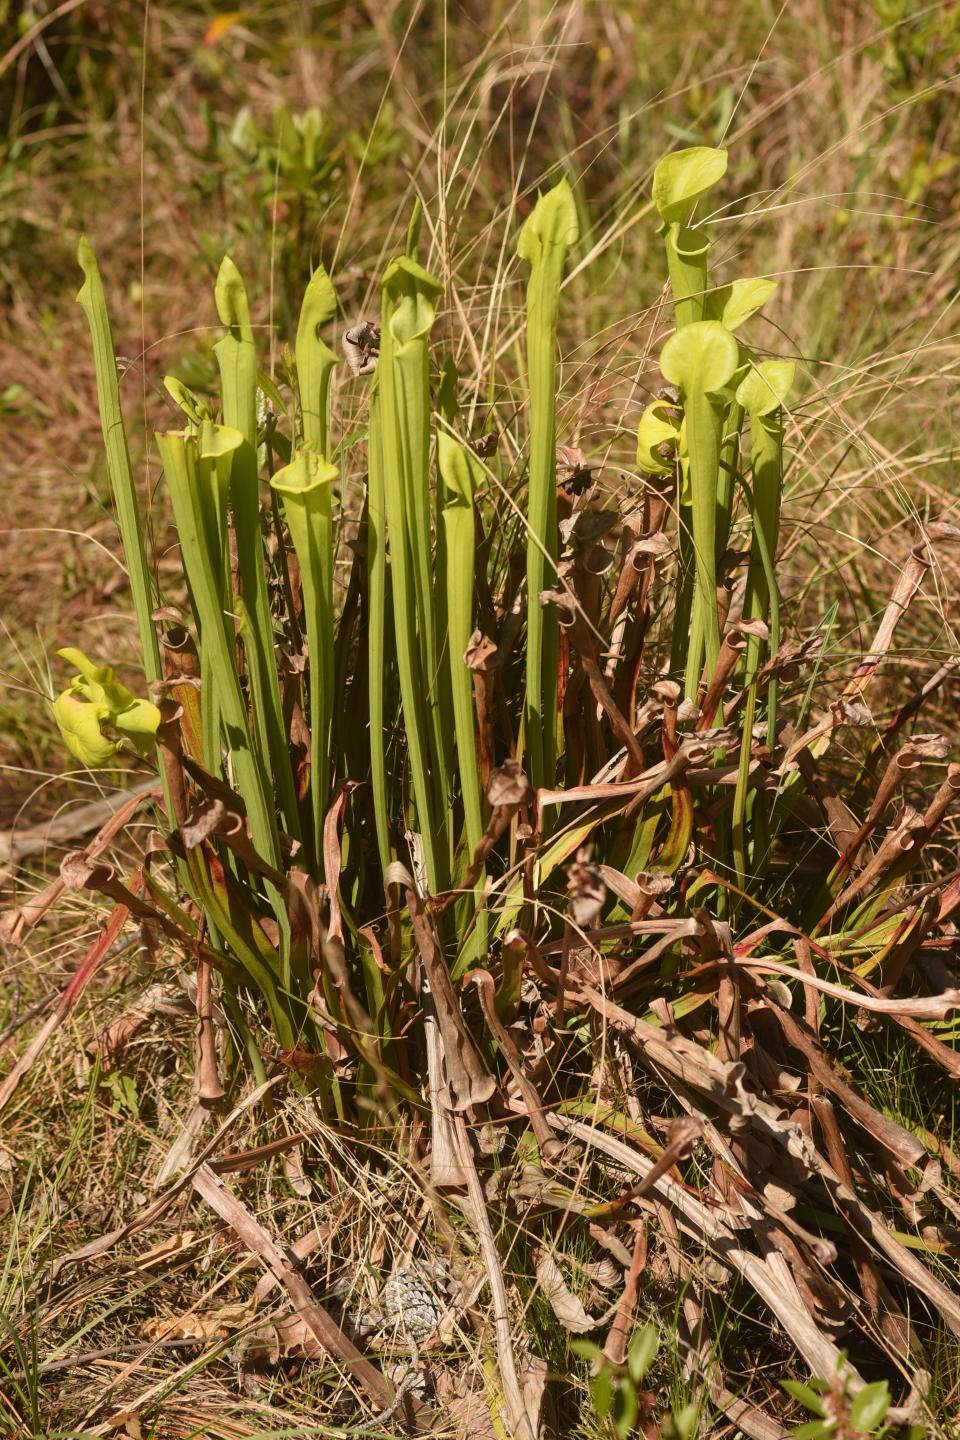 Pitcher plants and other carnivorous plants can often be found on the edges of pocosins, wetlands that are dry for much of the year. KEN BLEVINS/STARNEWS